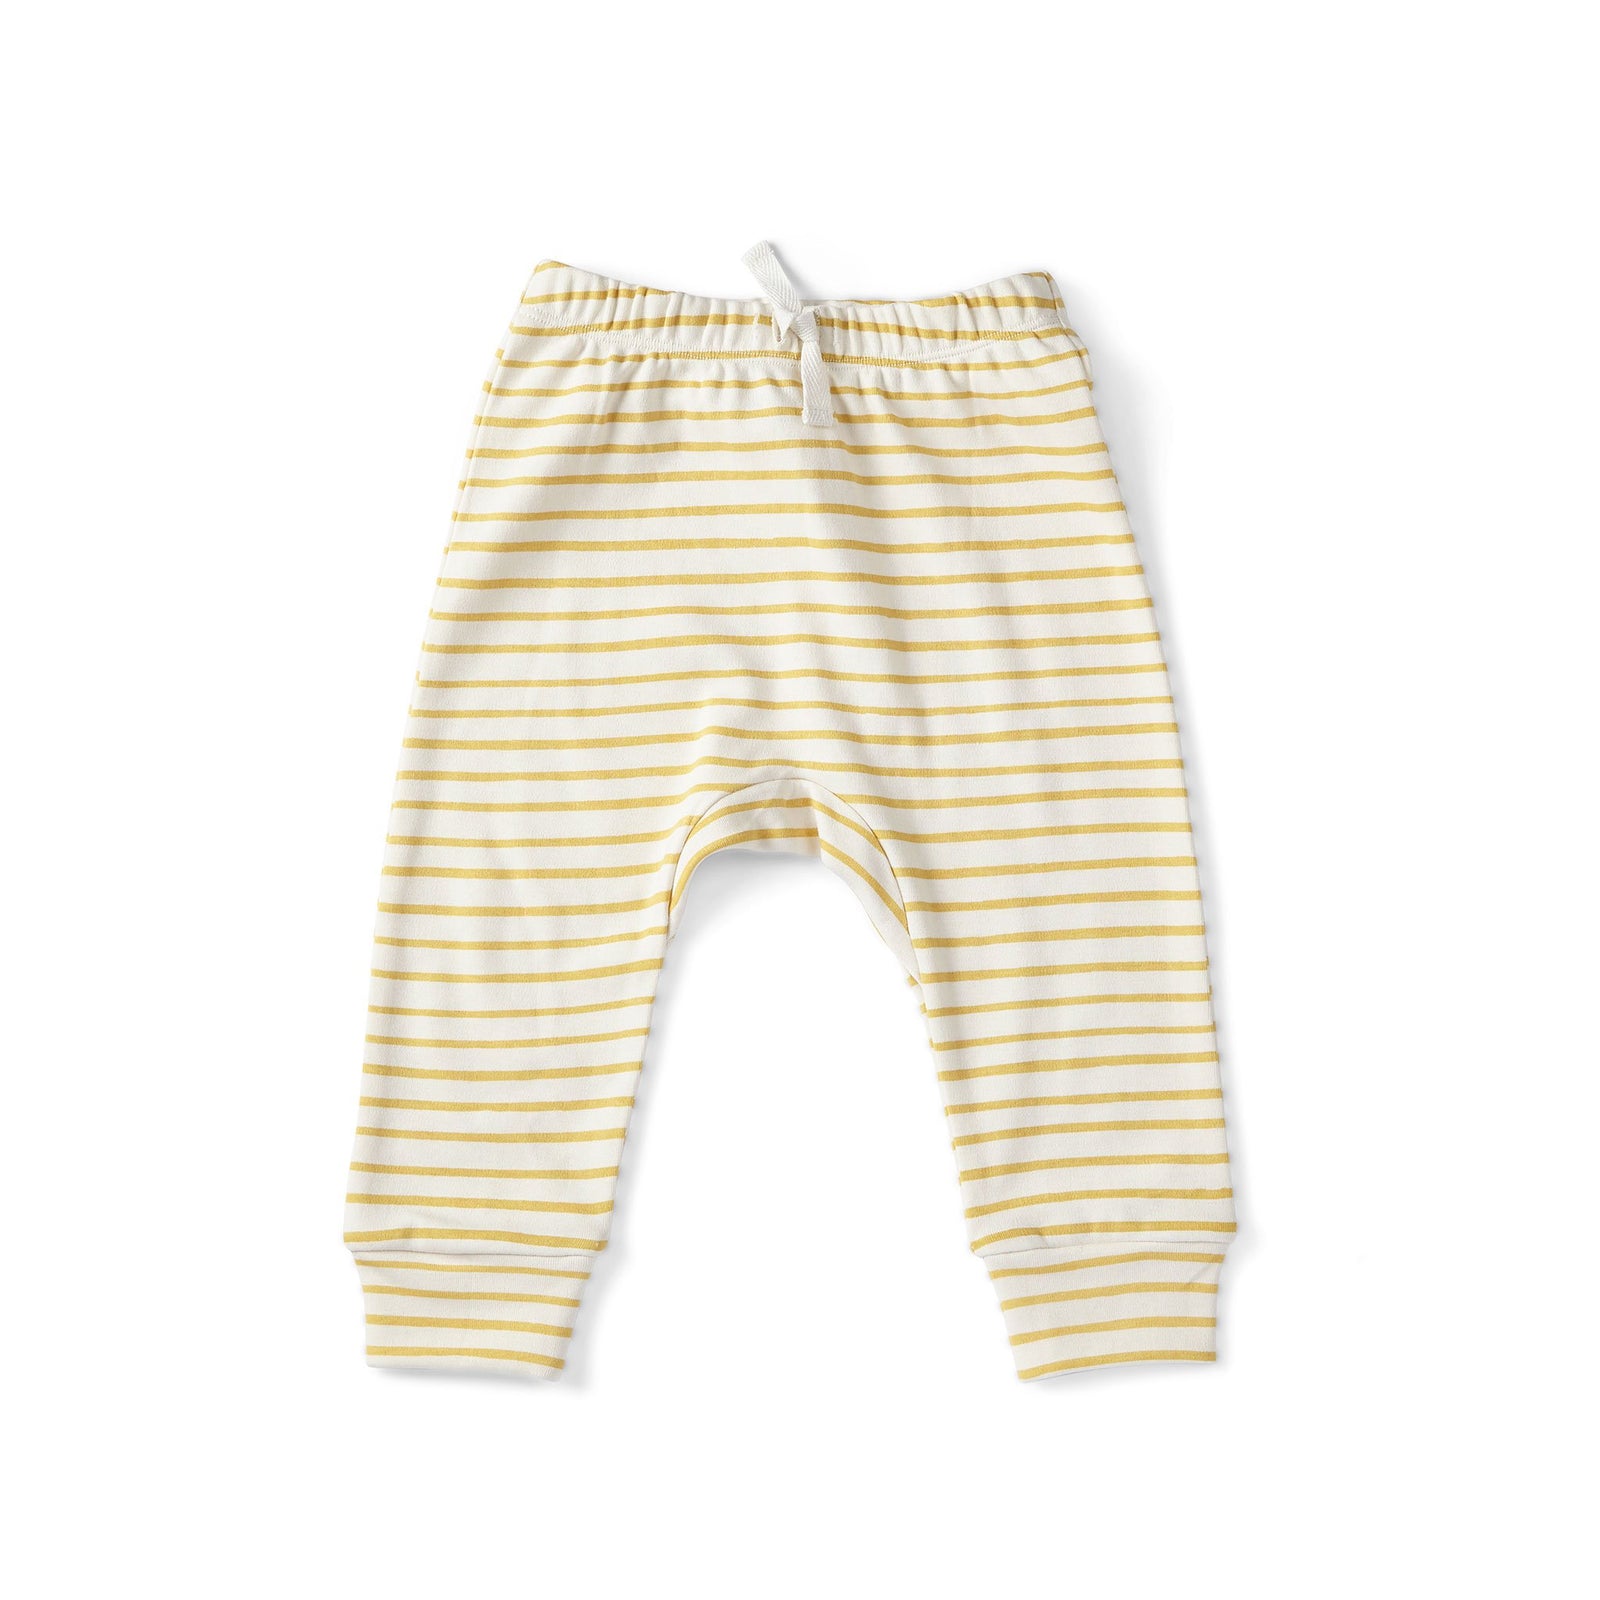 Pehr Marigold Organic Harem Pant. GOTS Certified Organic Cotton & Dyes. White with gold stripes.